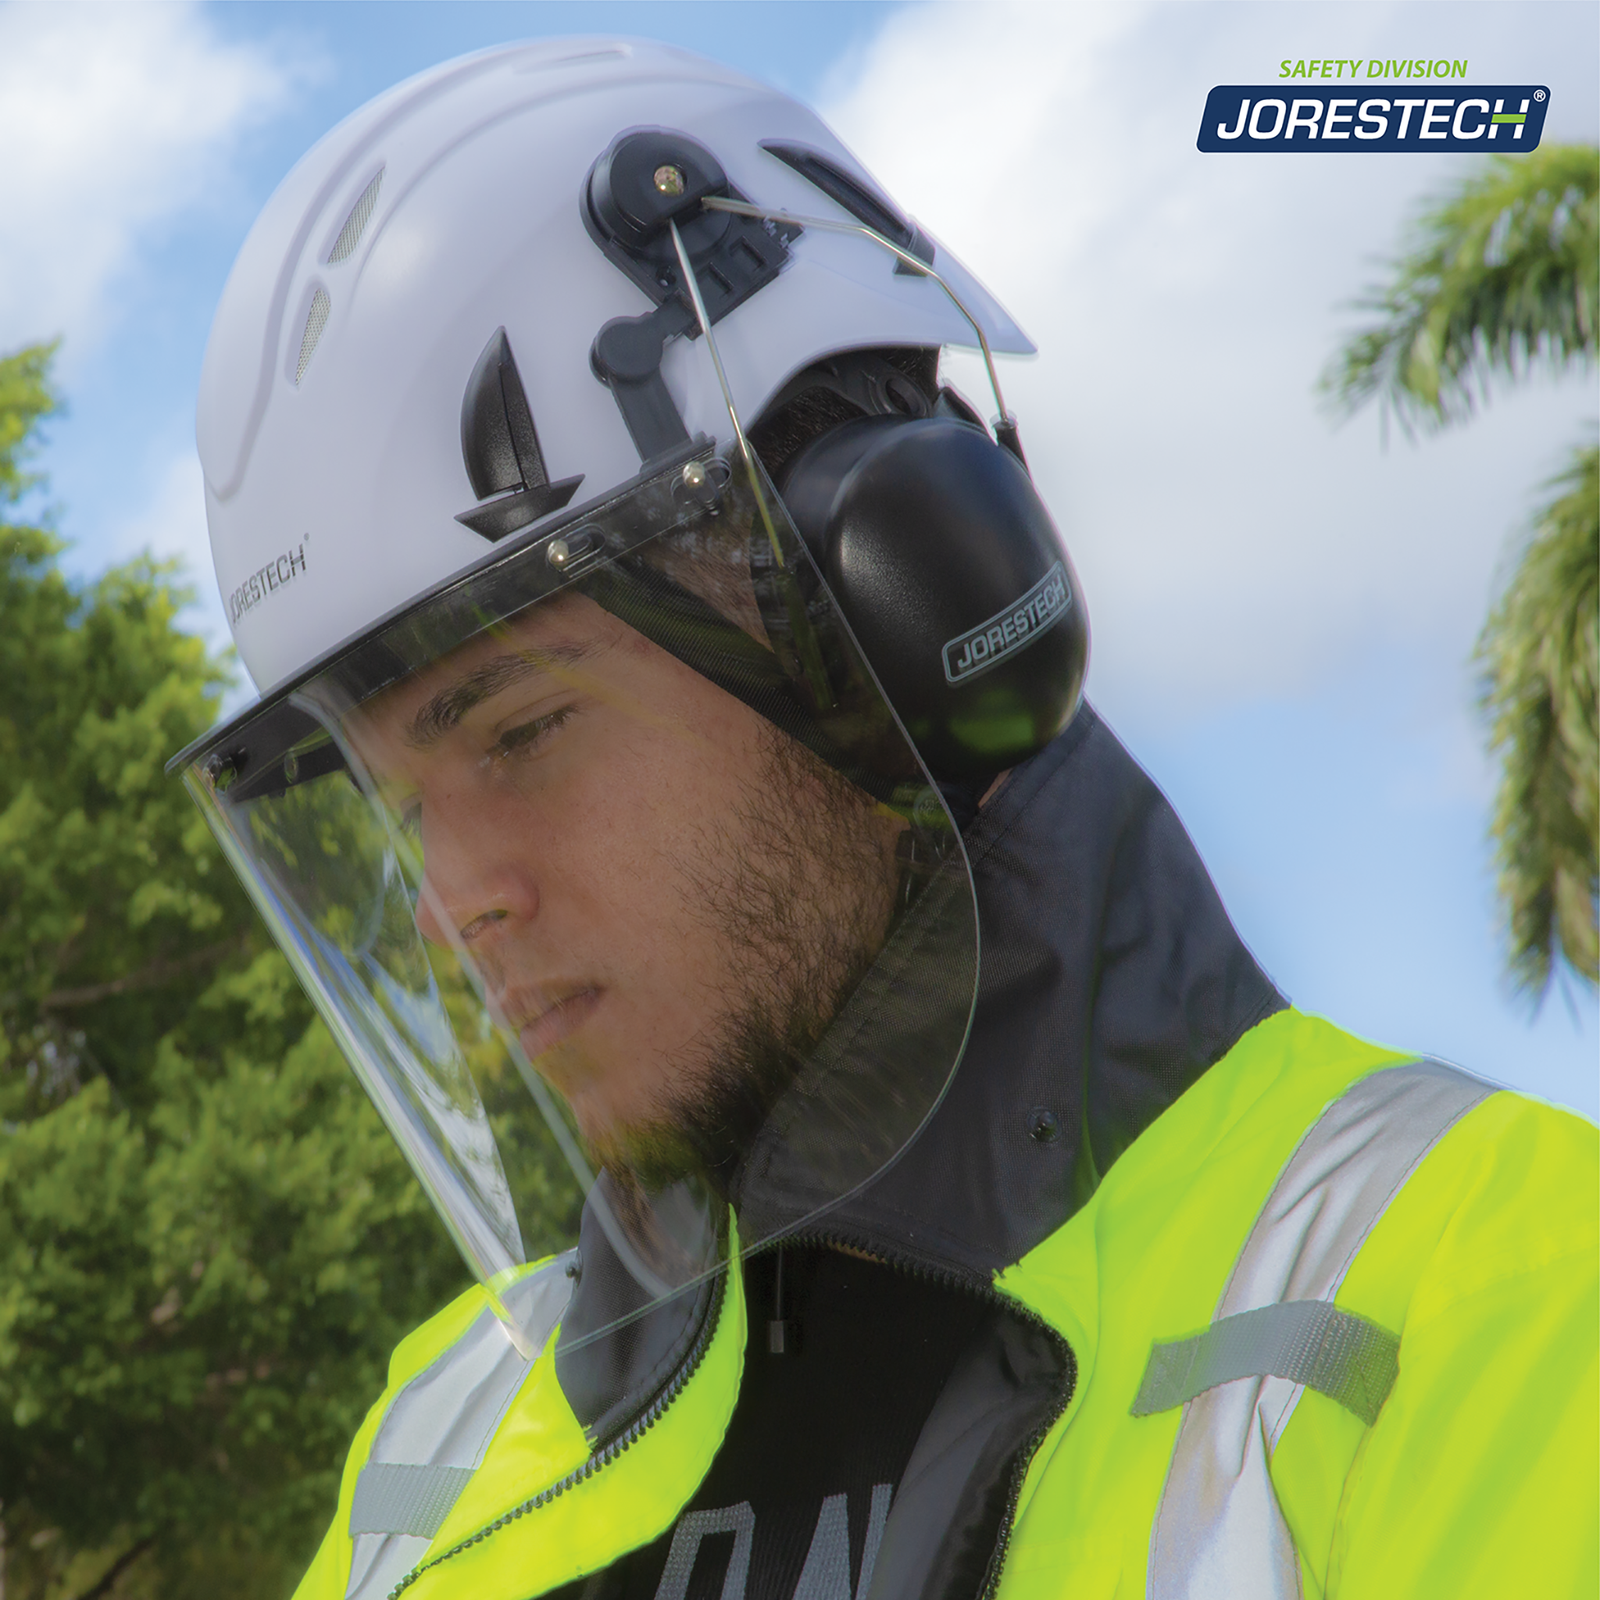 Worker wearing the ventilated safety work at height helmet system with face shield and ear muffs. He is also wearing a vi-si safety jacket while working outdoors. His face is protected by the JORESTECH face shield